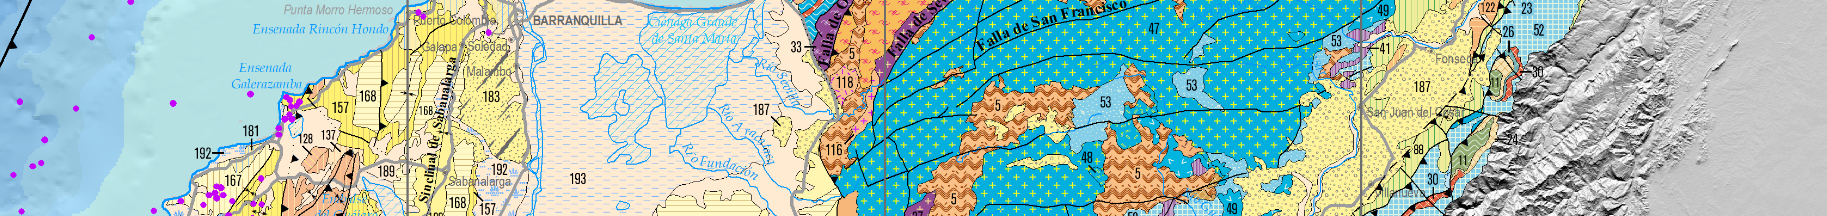 Geological Map of Colombia